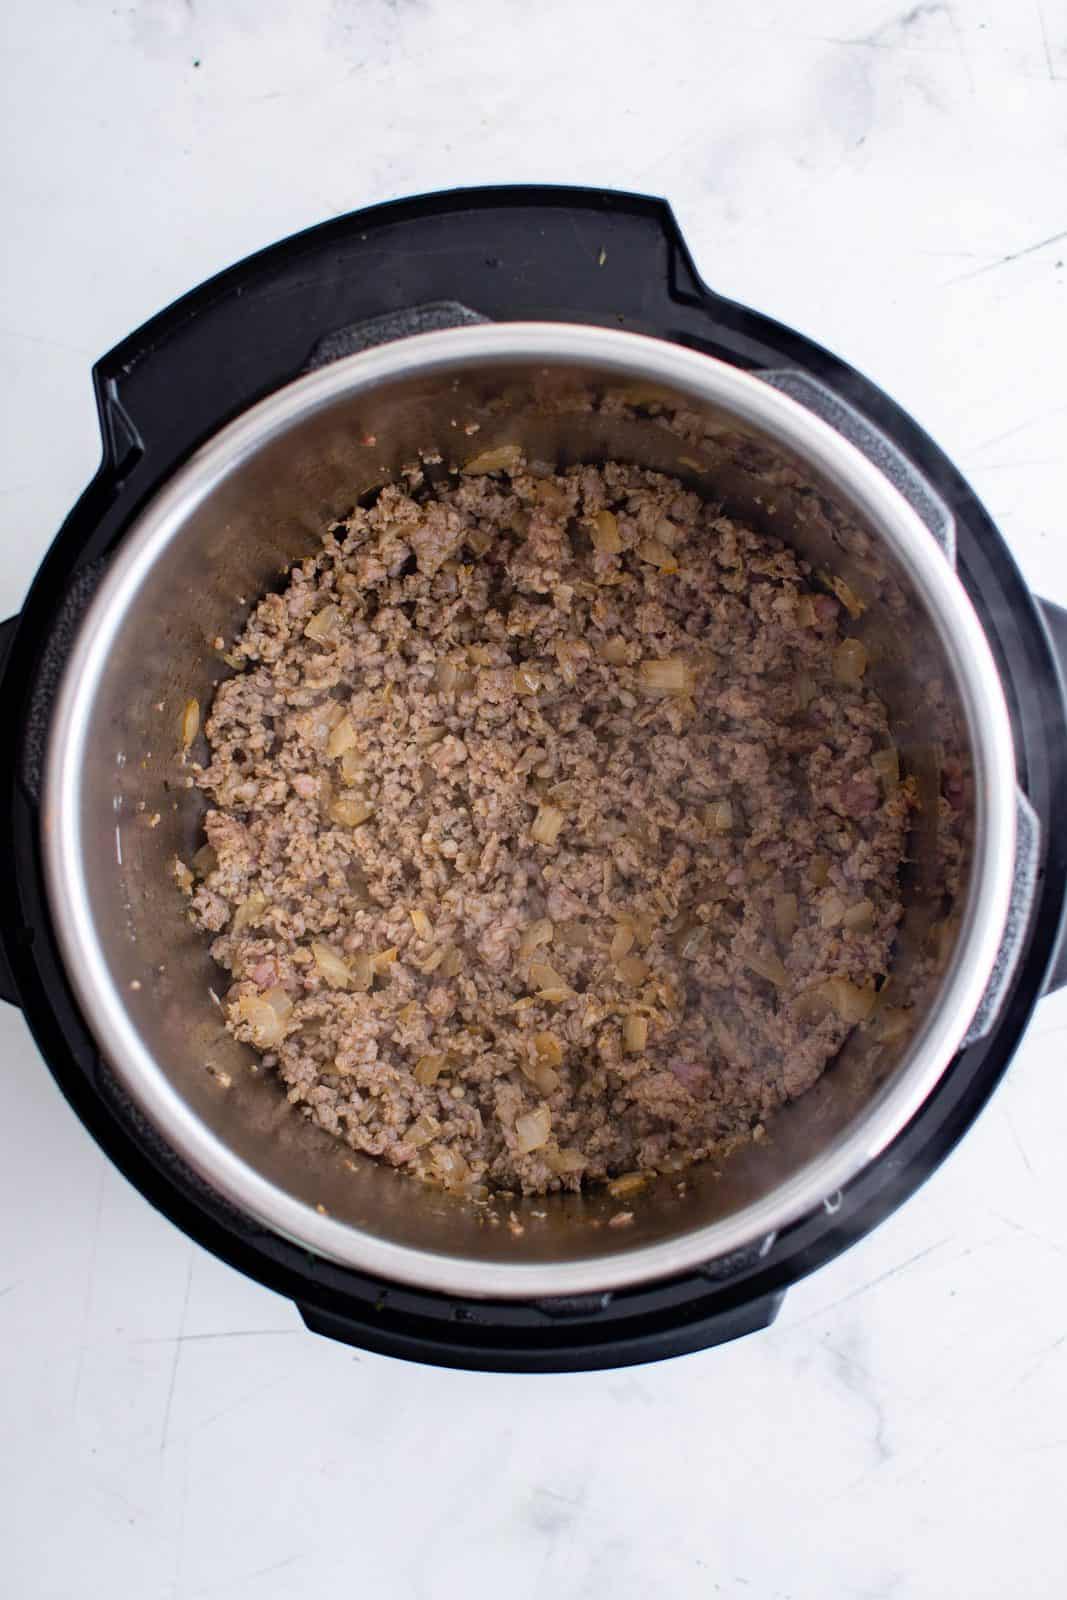 Ground italian sausage added to instant pot and cooked.